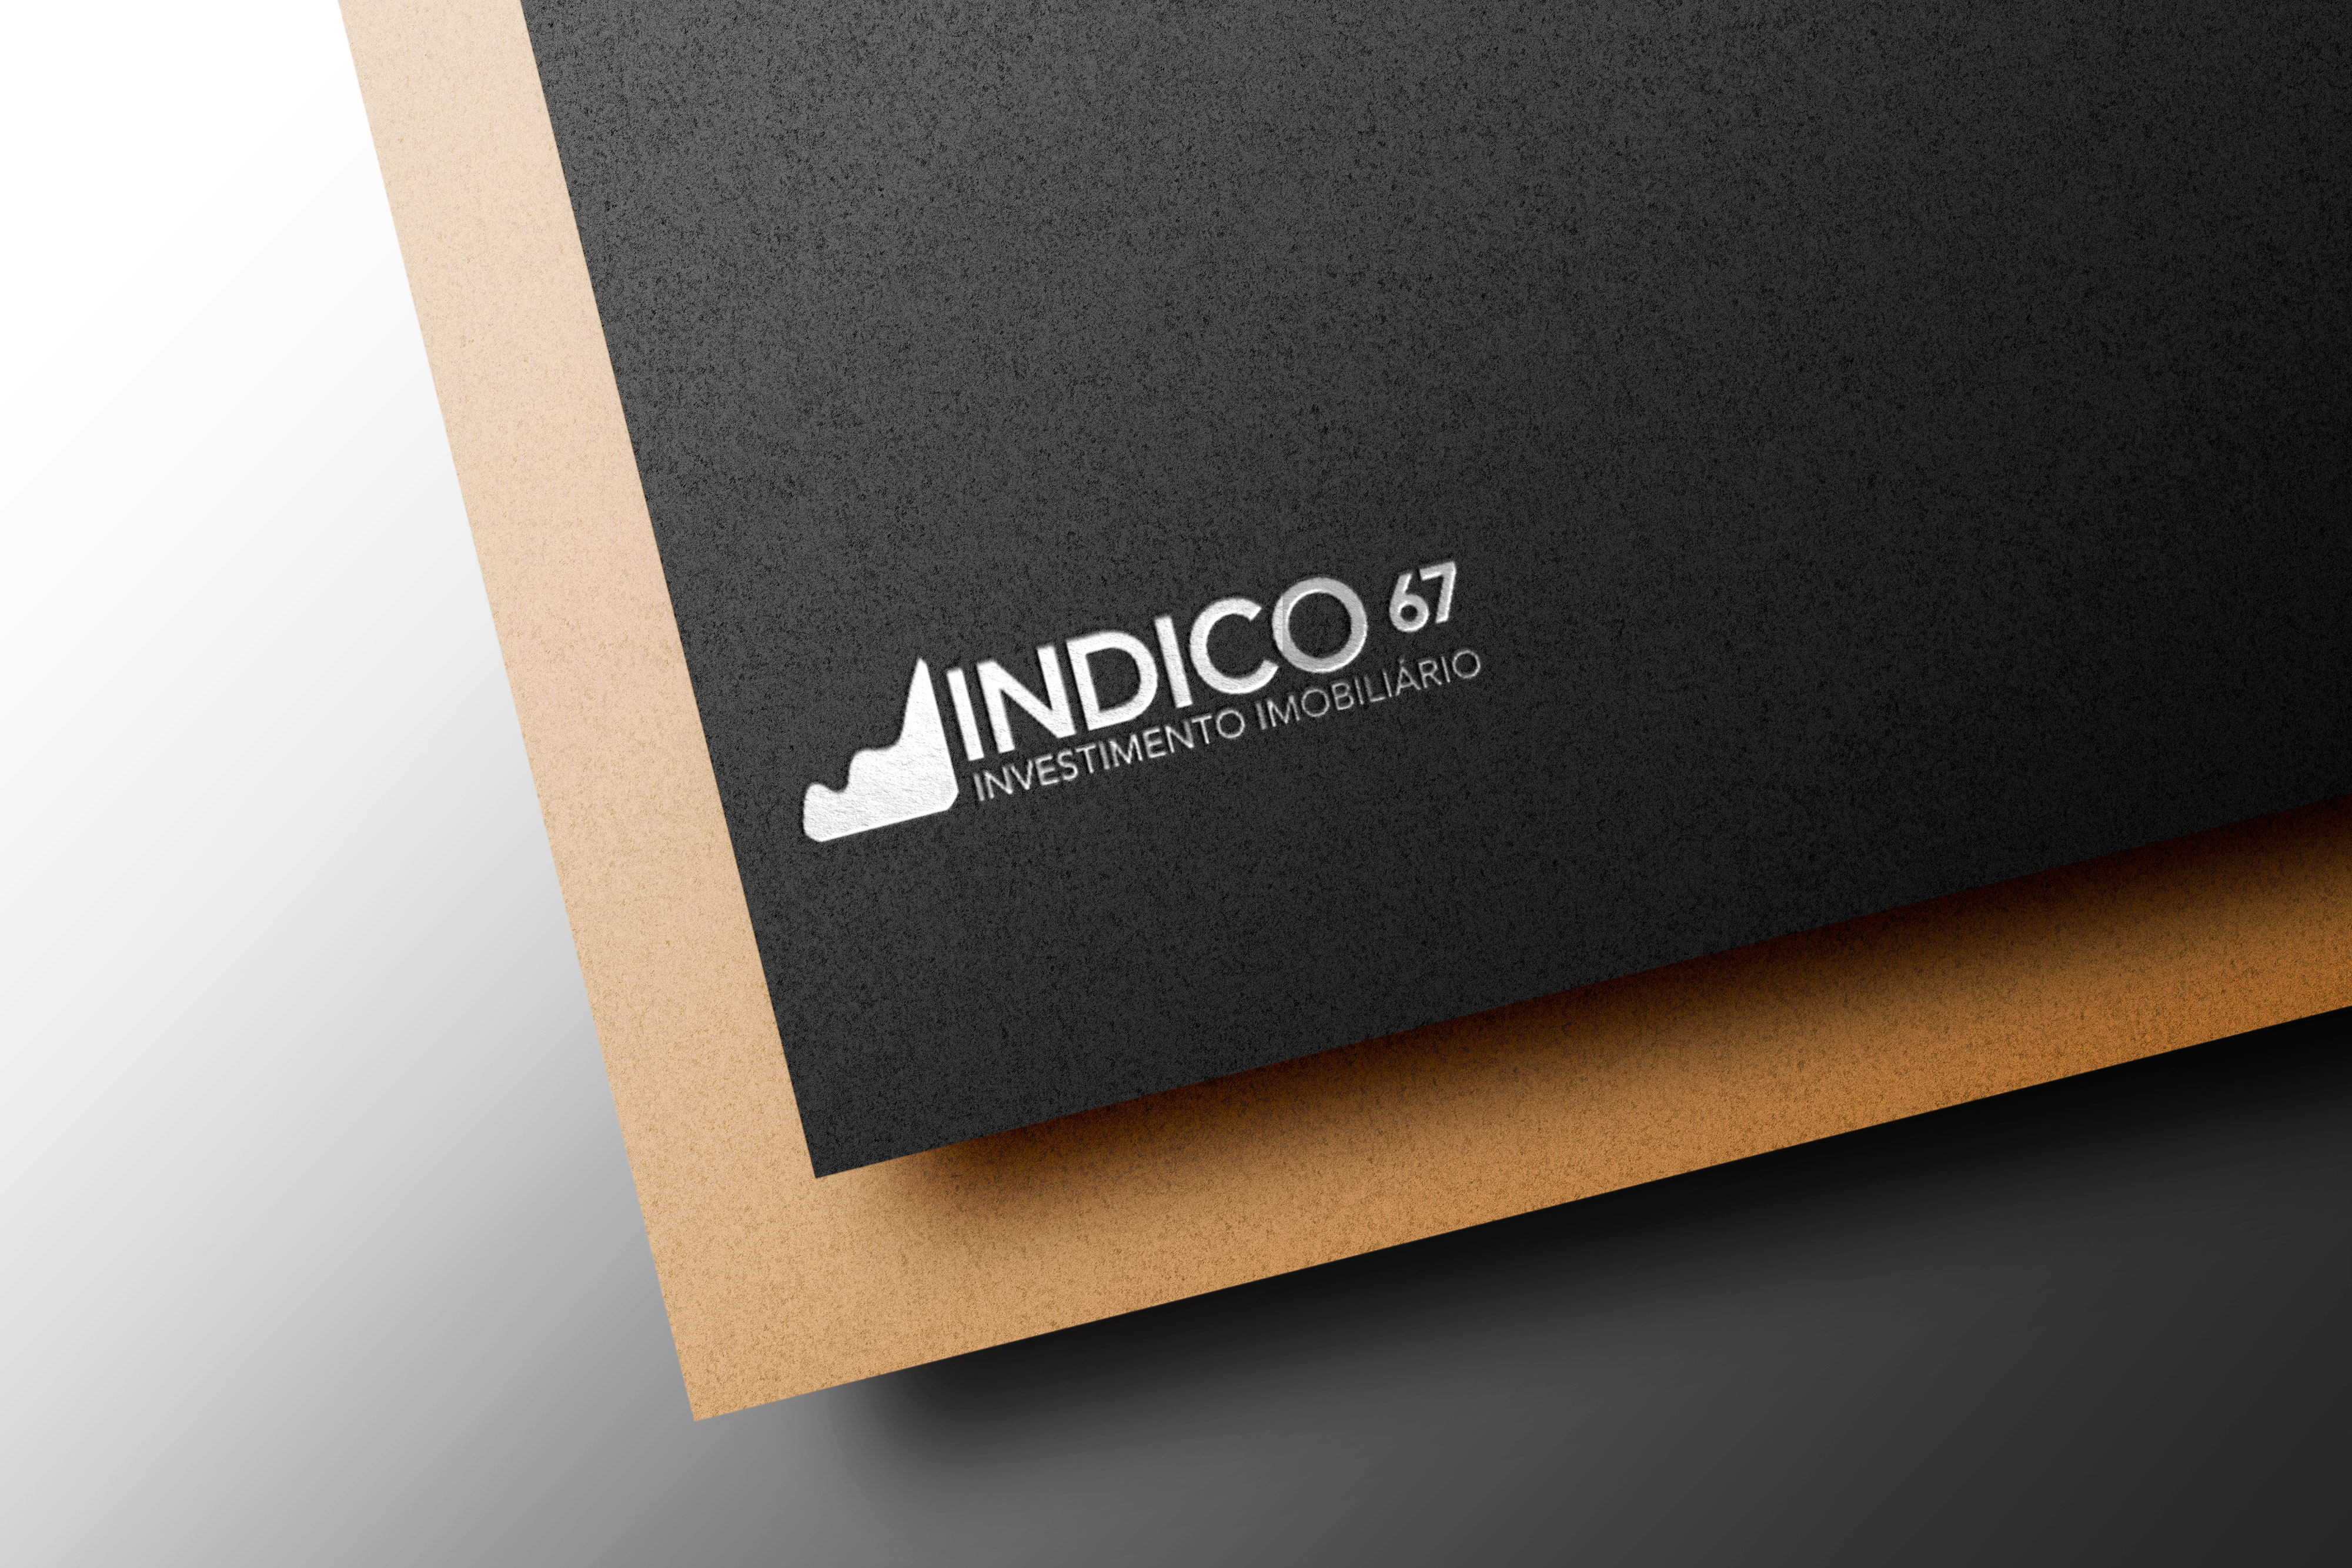 Indico 67 – Real Estate Investment